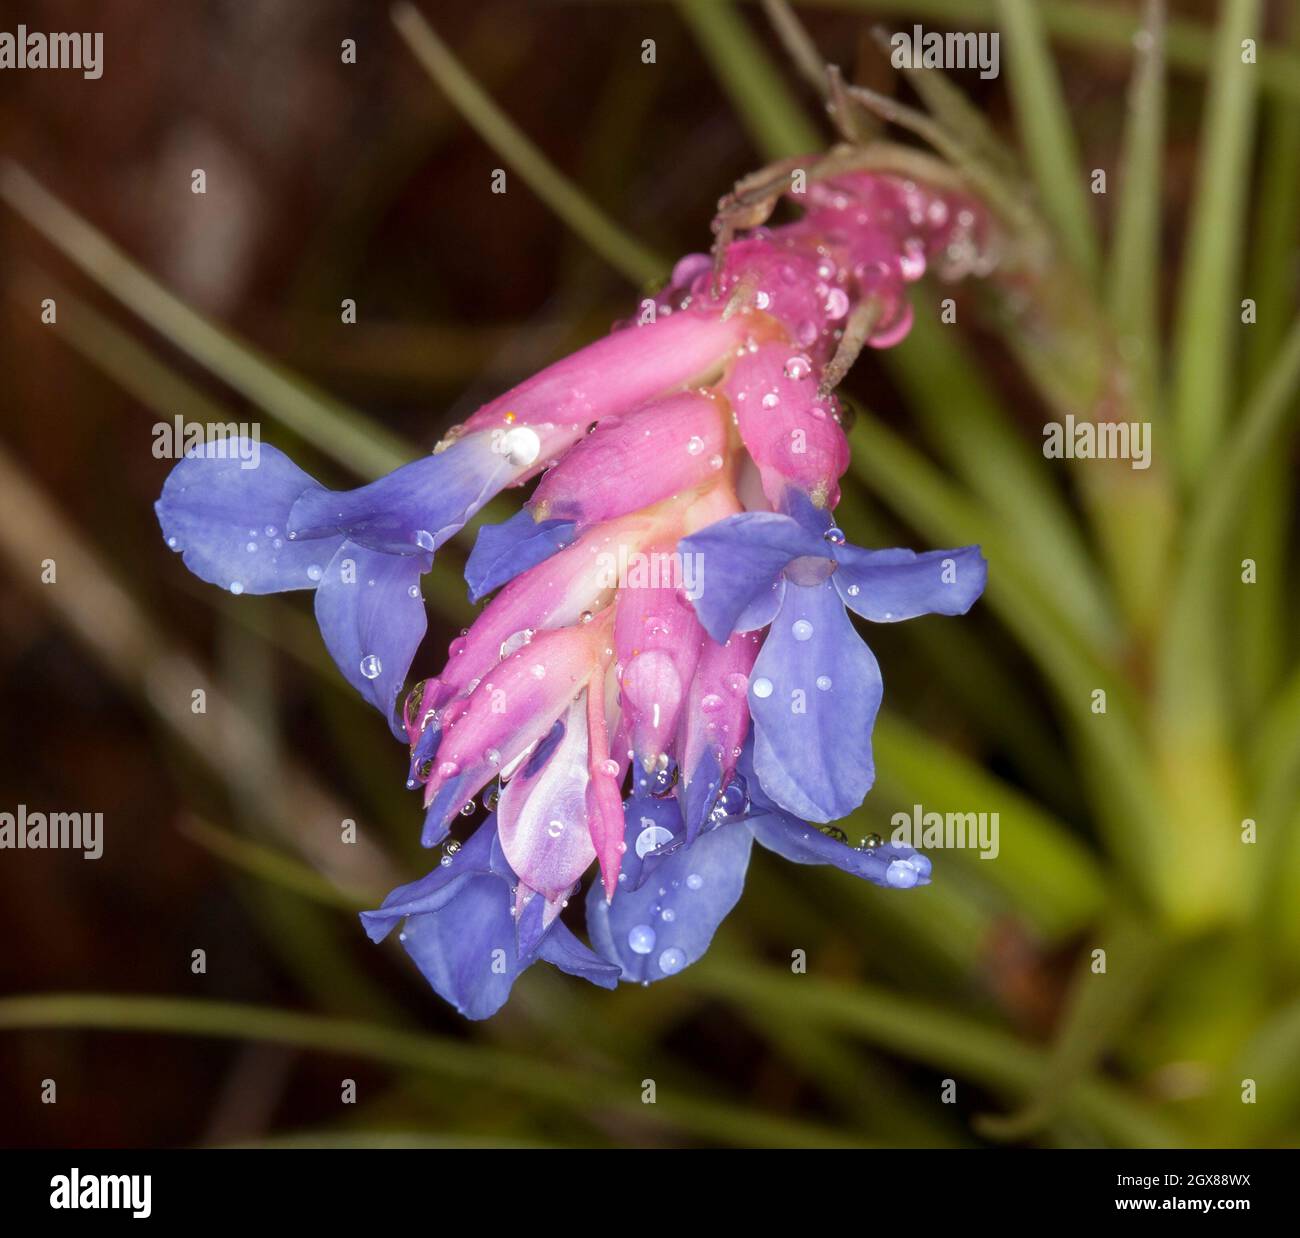 Flowers and foliage of Tillandsia aeranthos', a bromeliad, air plant, with beautiful blue flowers and pink bracts covered with raindrops Stock Photo